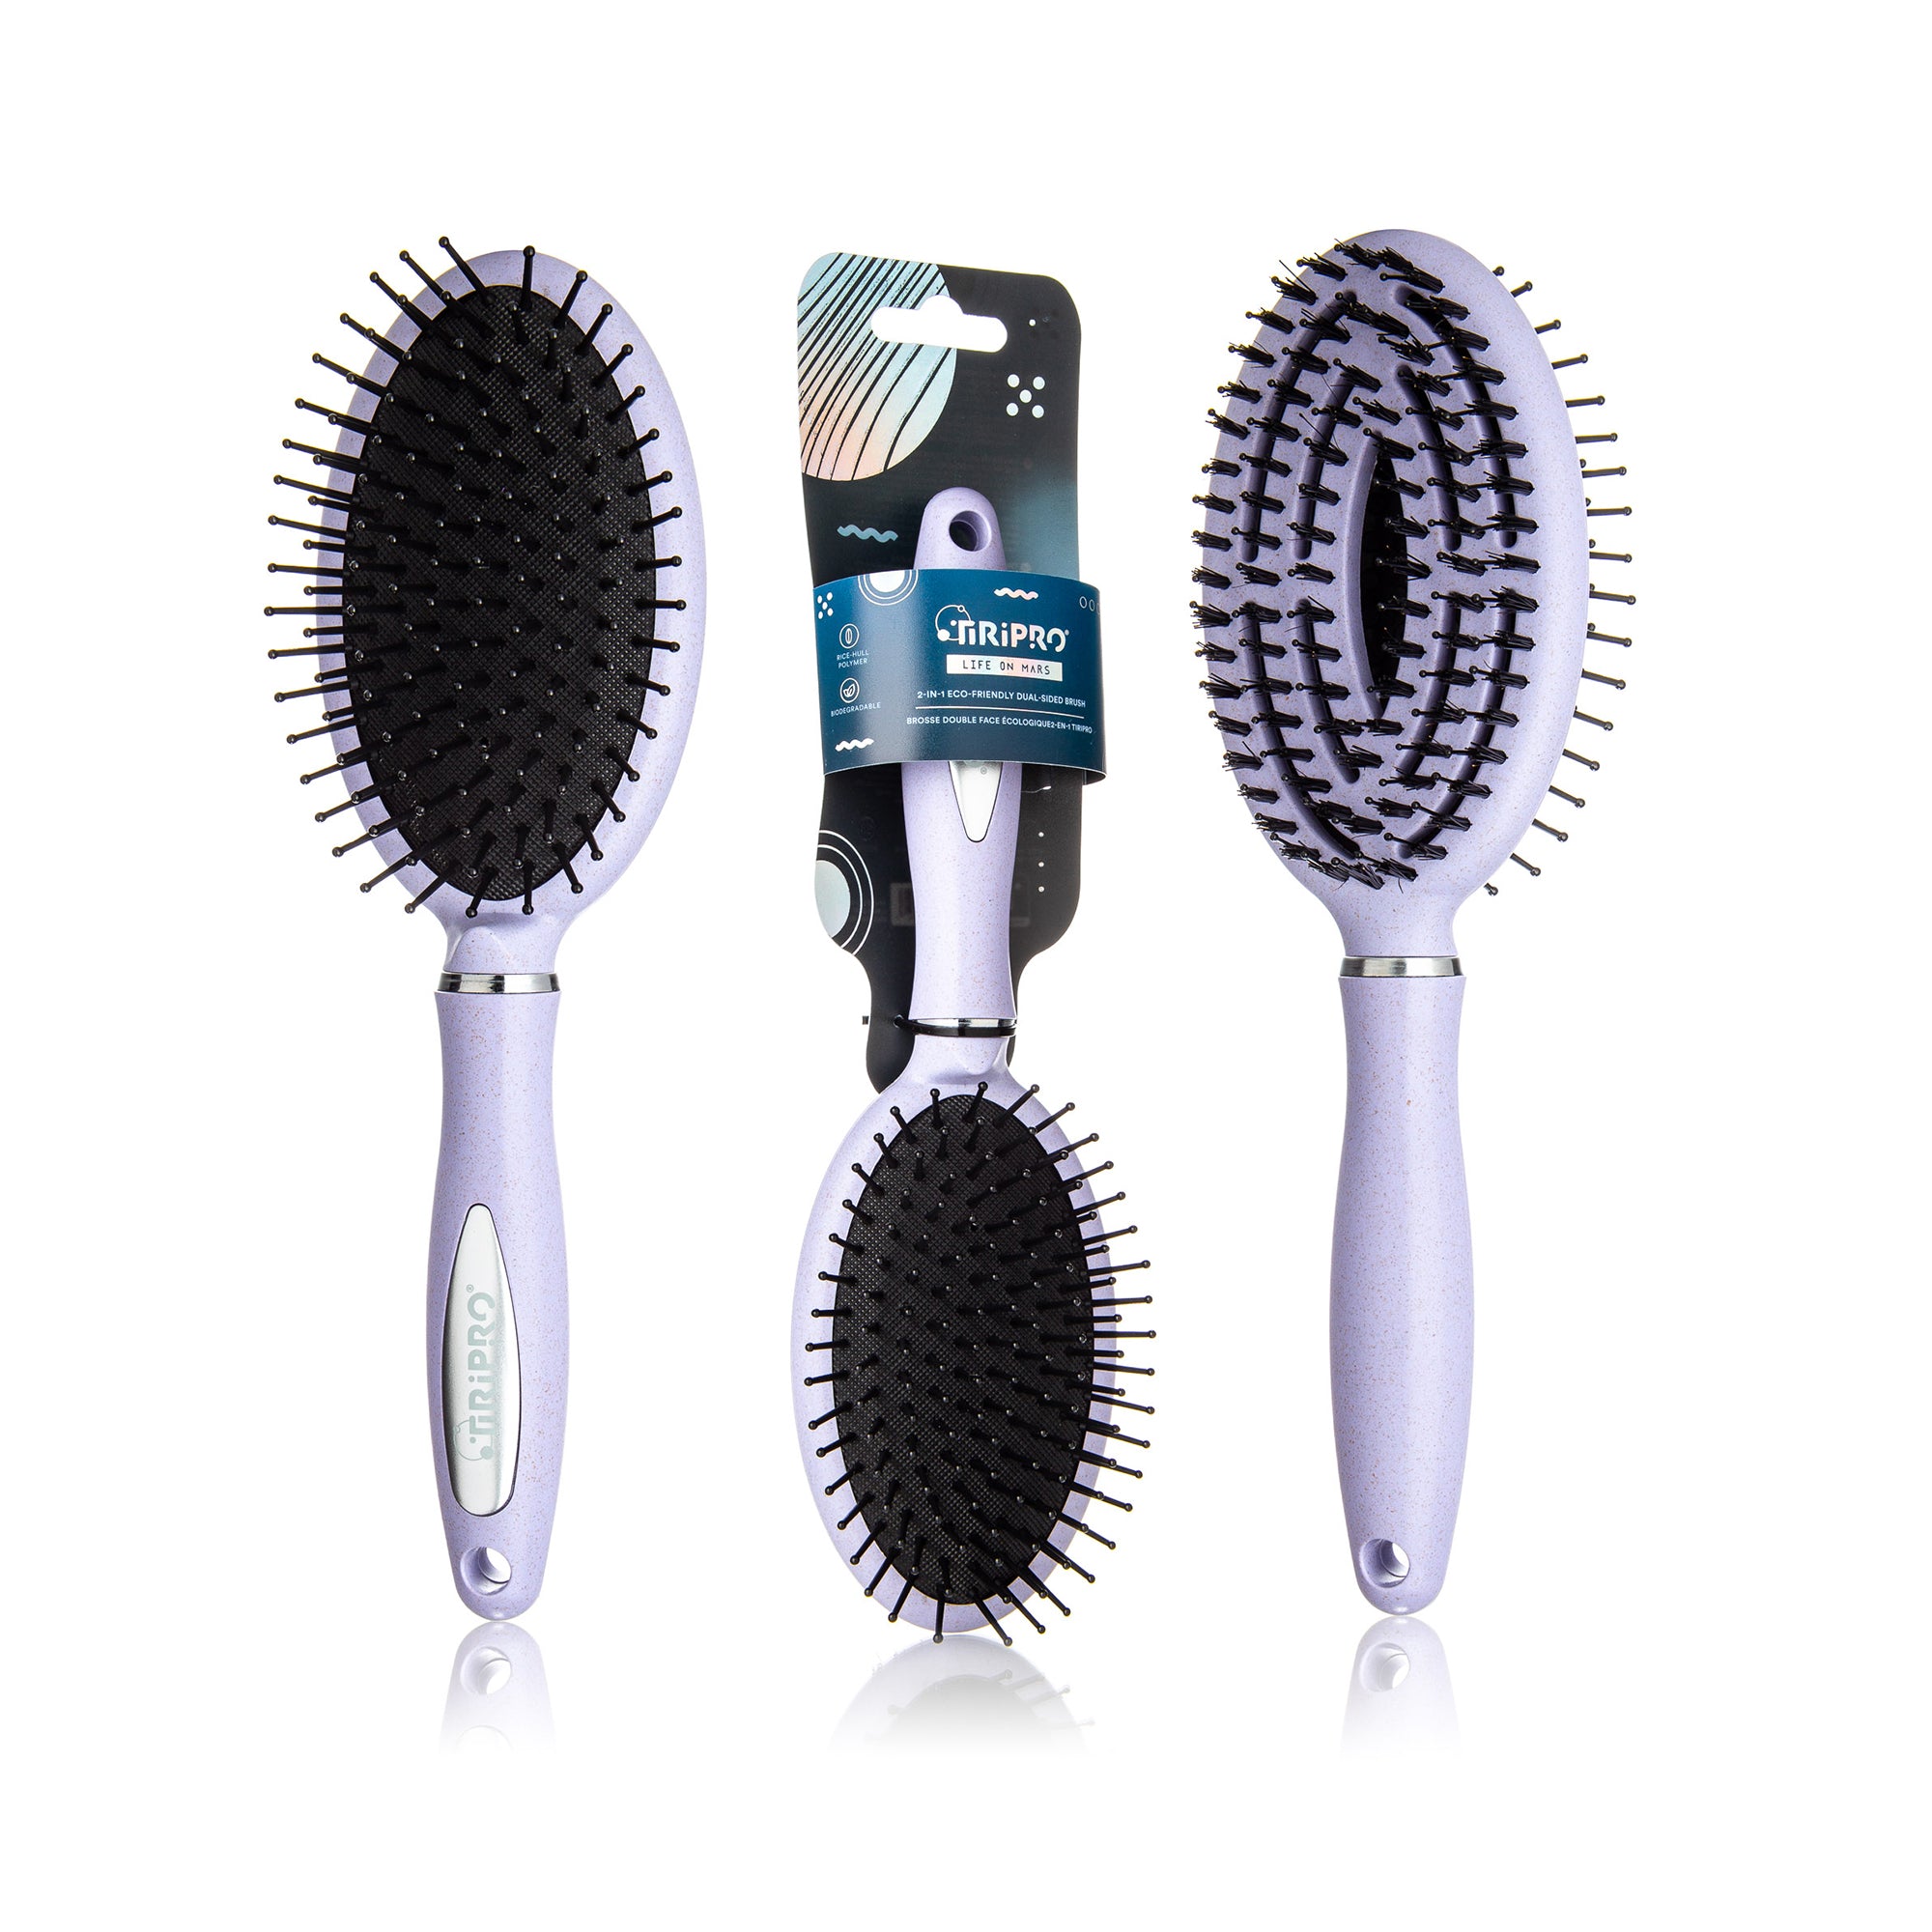 Eco-Friendly 2in1 Thermal Hair Brush with Paddle & Vent Design (Rice Hull)